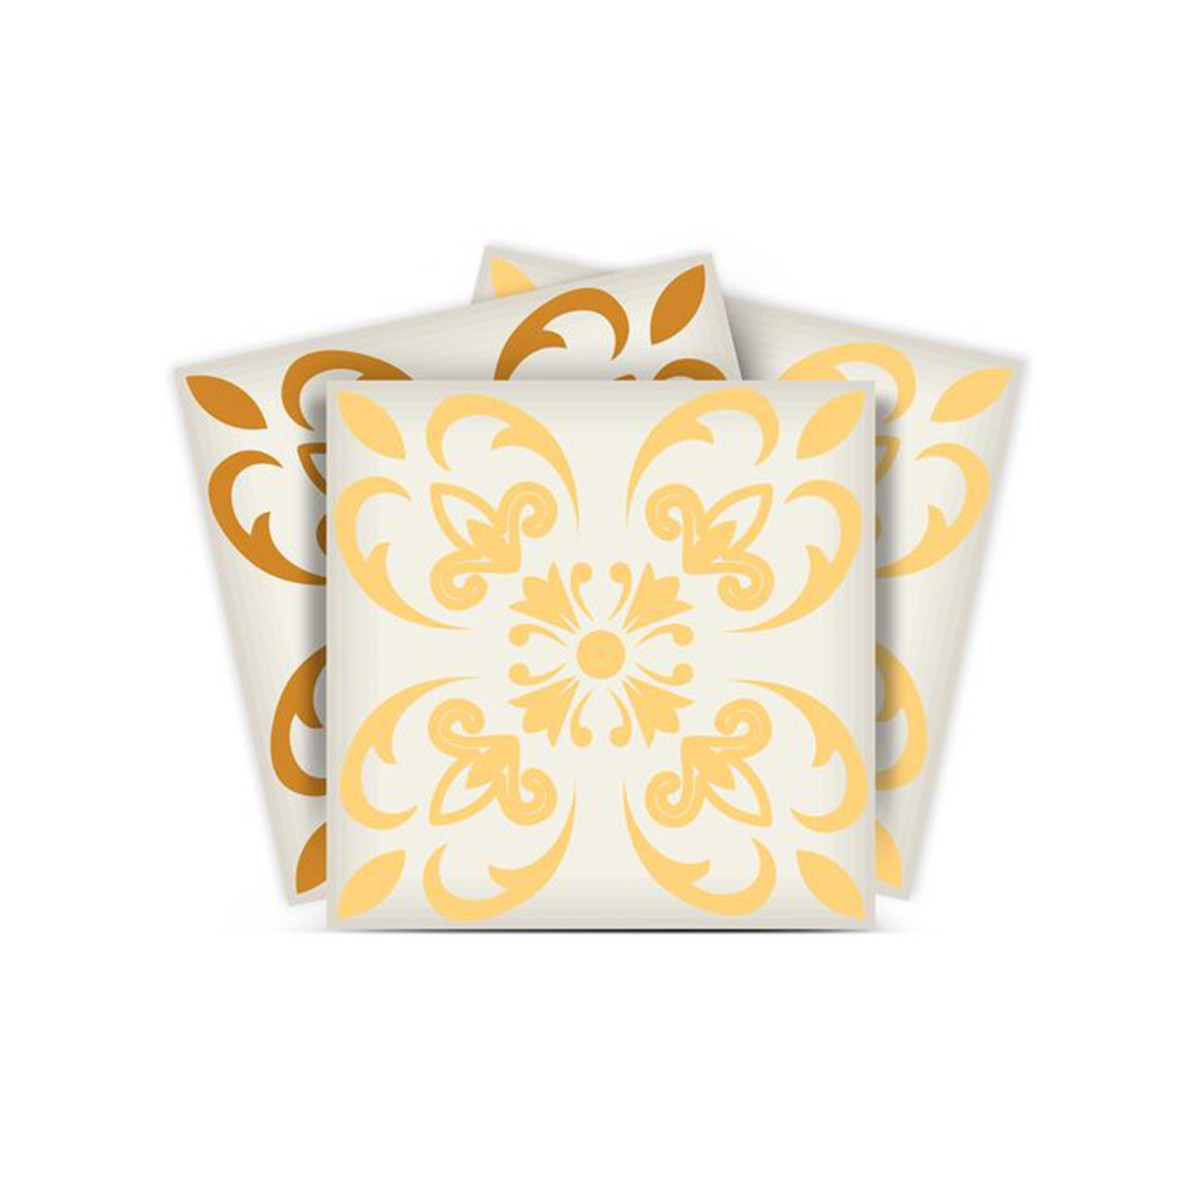 5" X 5" Golden Yellow Retro Peel And Stick Removable Tiles-399841-1